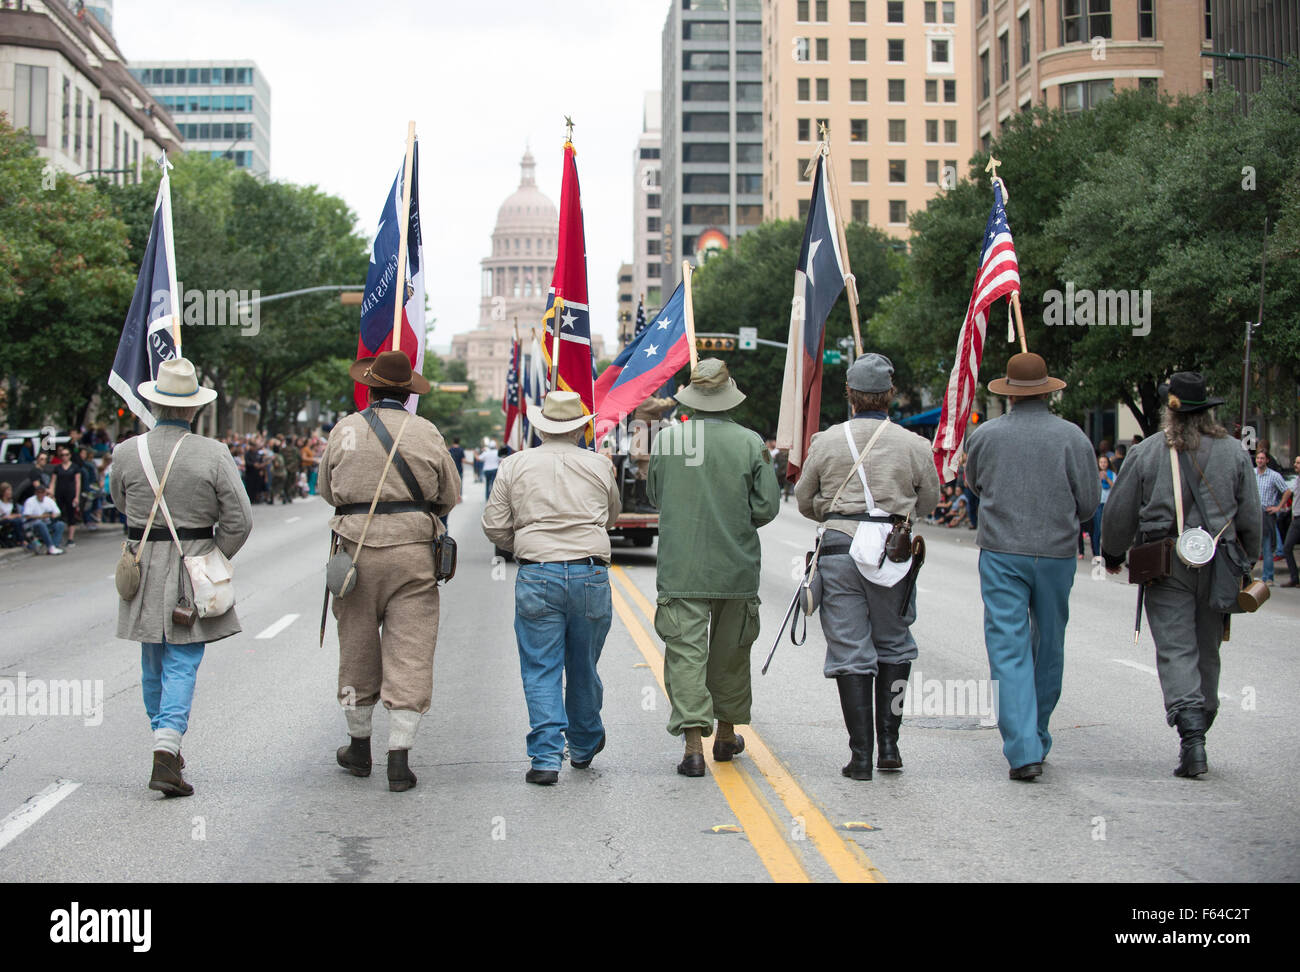 Austin, Texas USA November 11, 2015: Sons of Confederate Veterans display Civil War Confederate battle flags and the U.S. flag  during the Veteran's Day parade up Congress Avenue and ceremony at the Texas Capitol. Several thousand Texans lined Congress Avenue to witness military heroes, marching bands and floats in the annual parade. Credit:  Bob Daemmrich/Alamy Live News Stock Photo